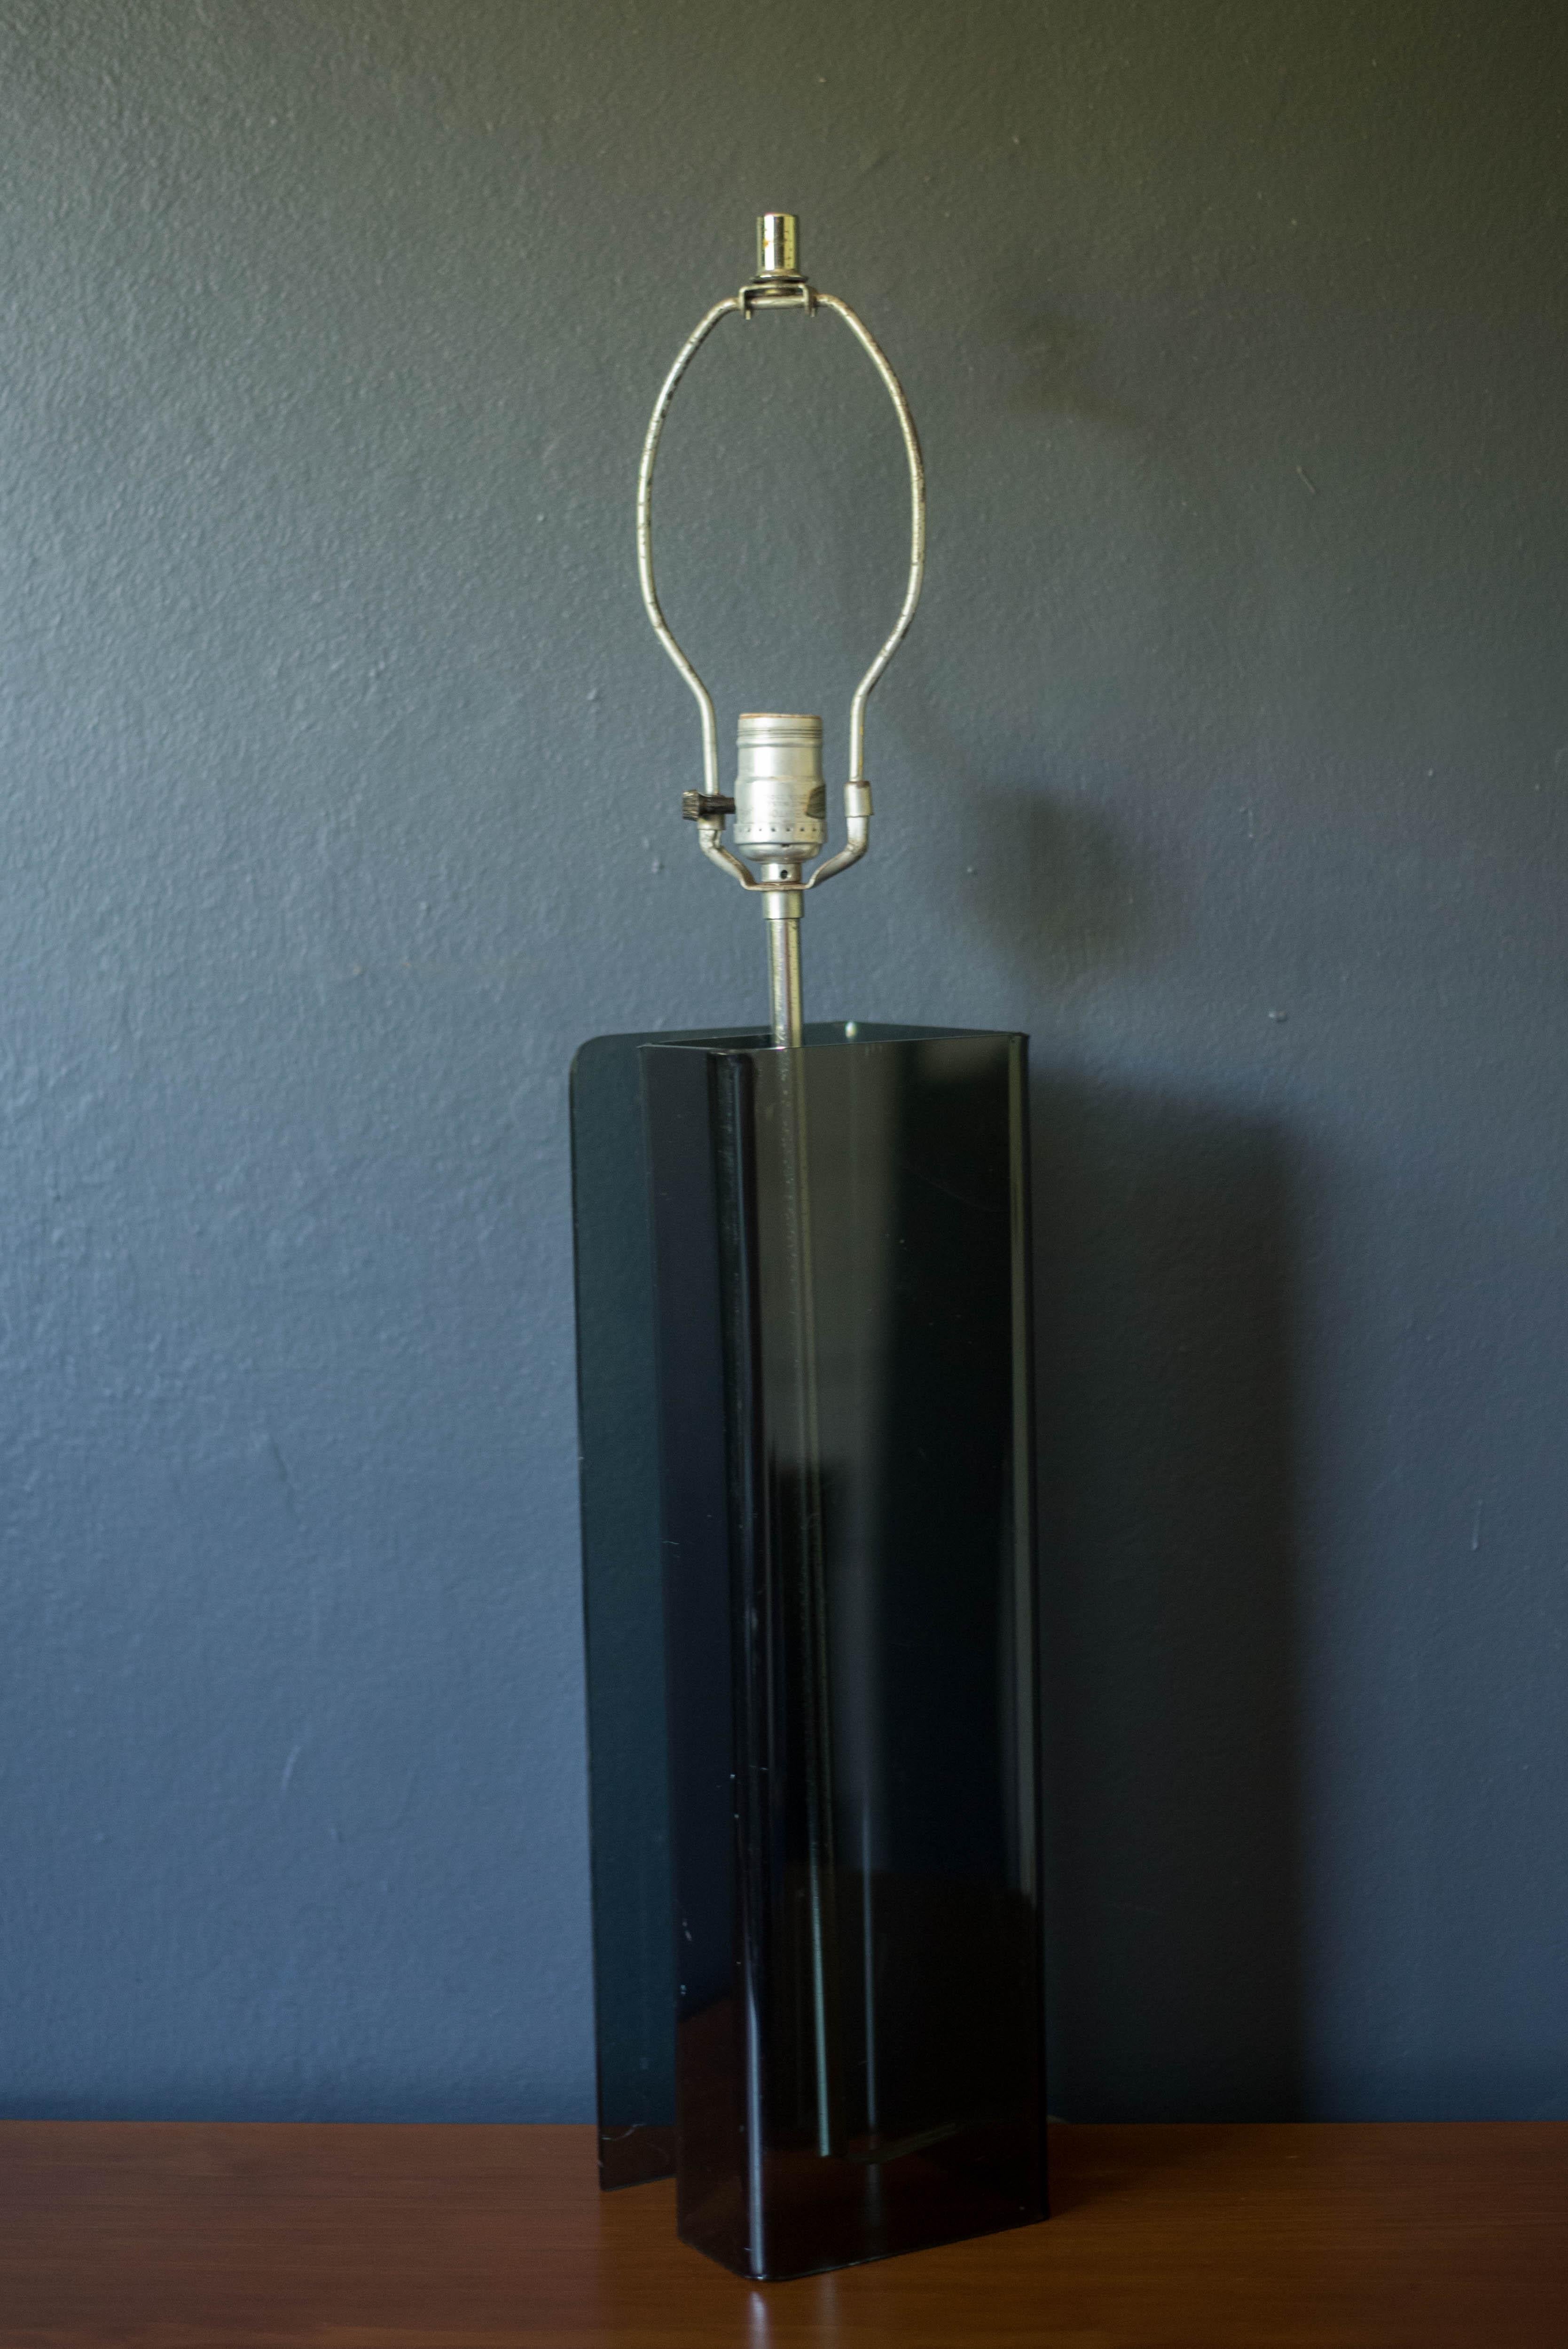 Mid-Century Modern Space Age accent table lamp circa 1970s. Features a tall smoked acrylic base with a floating aluminum center rod. Lamp shade is not included.

.